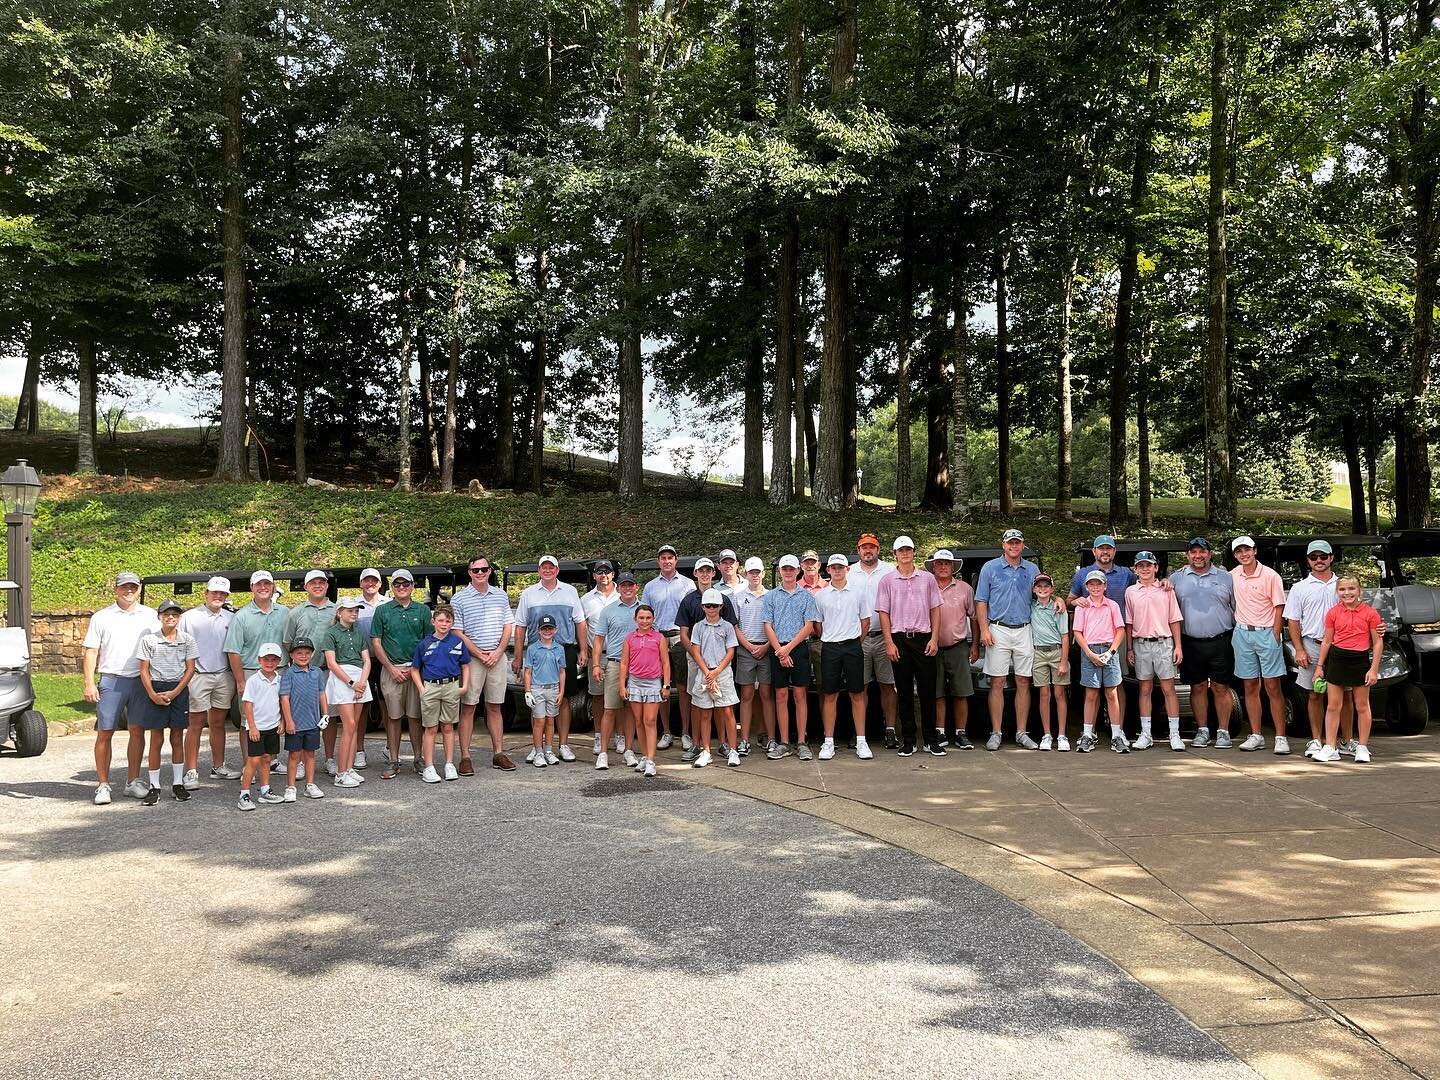 We had the BEST time at our Parent-Child Golf Tournament this past weekend! ⛳️🏌️

Congratulations to all of our Champions🏆 &amp; a huge thank you to everyone who participated! ⛳️

#mooresmillclub #golftournament #parentchild #champions #auburnalaba